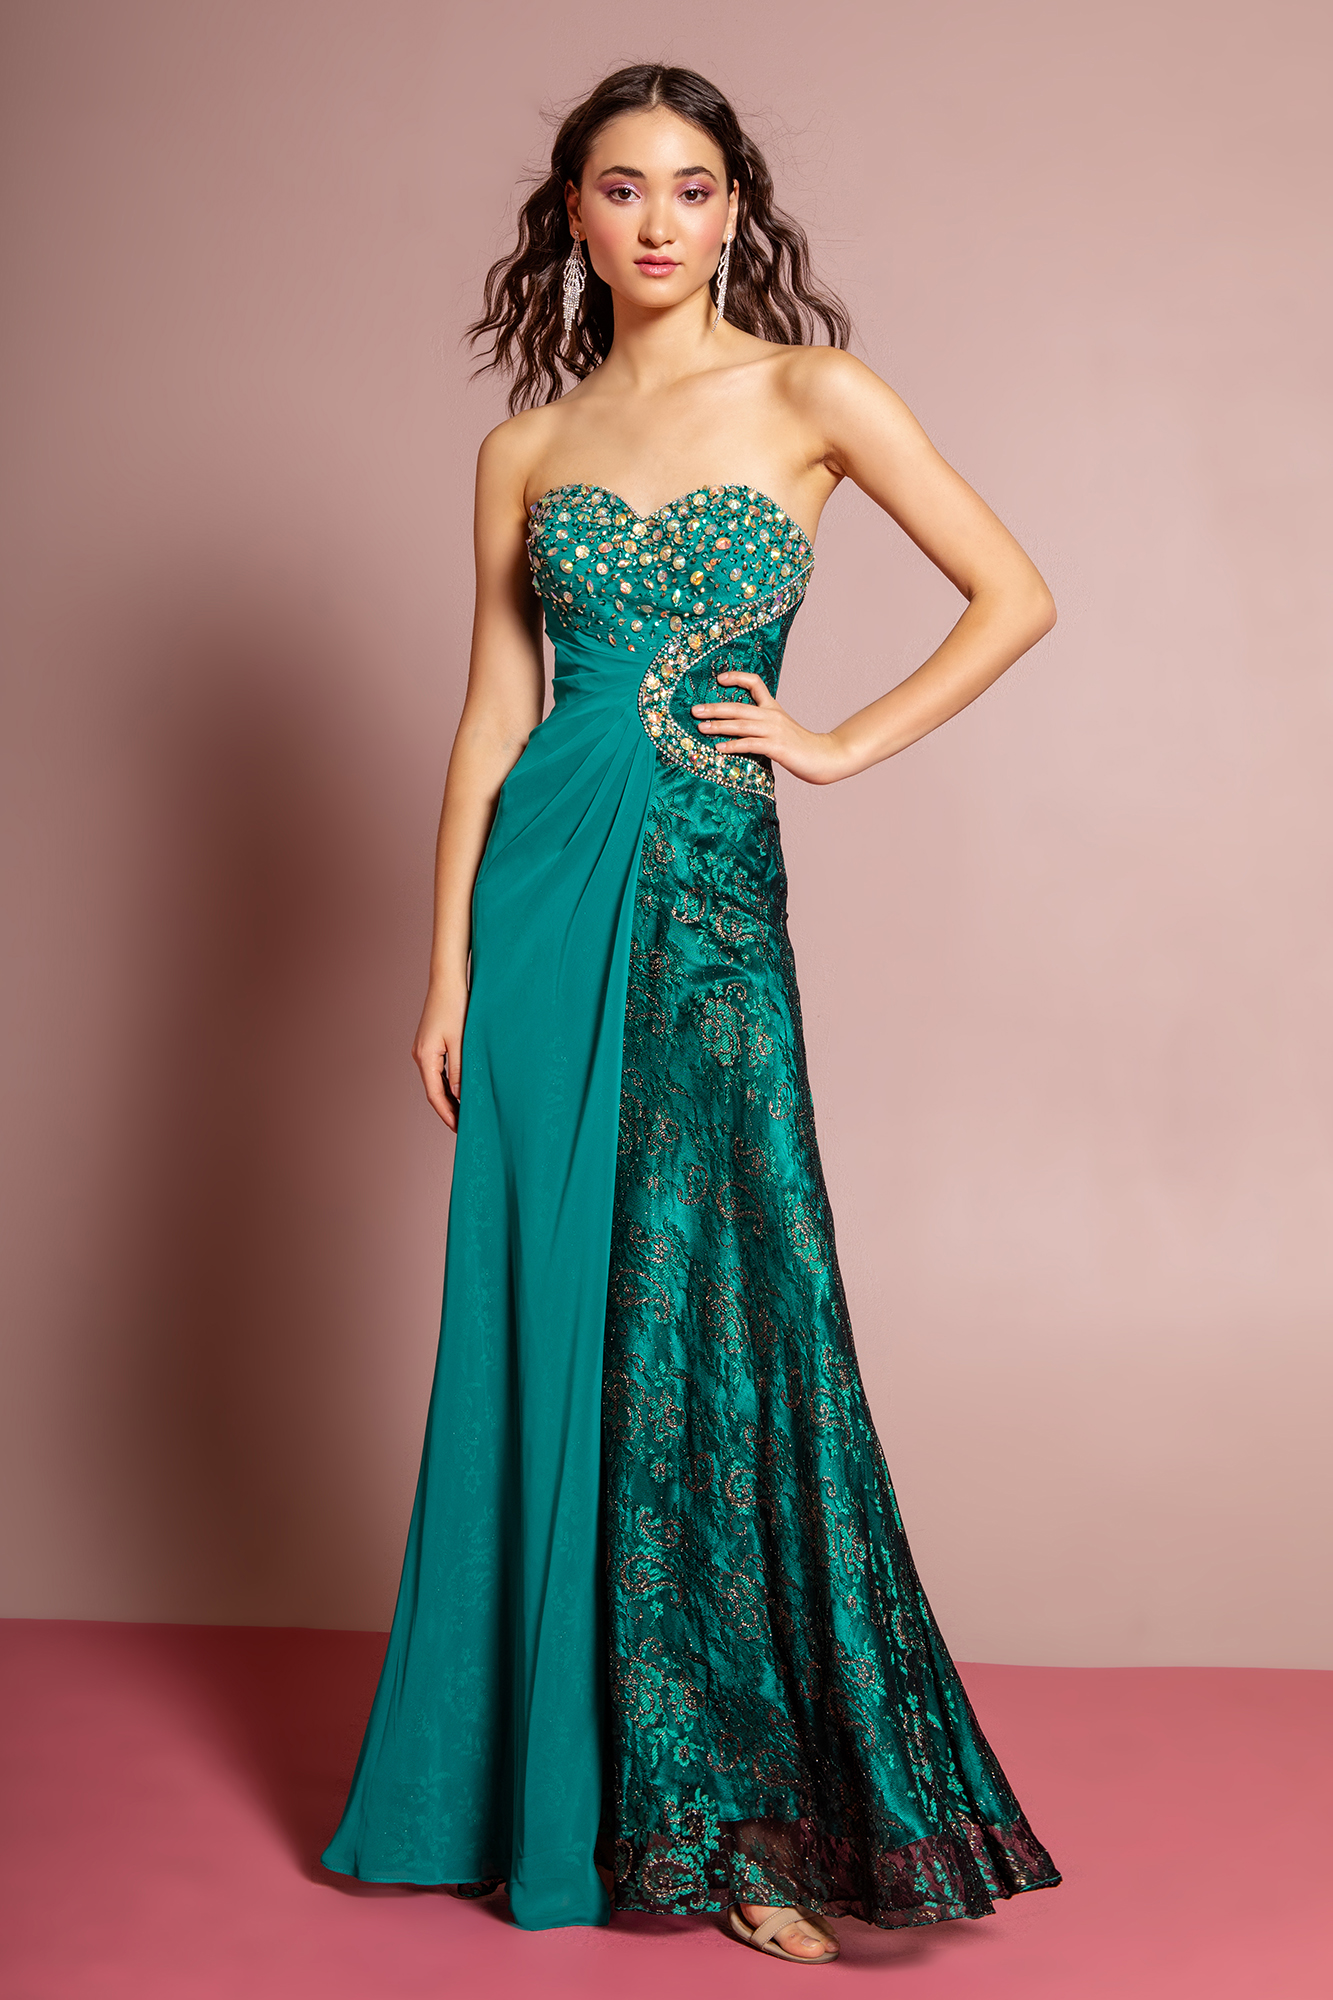 woman in strapless green gown